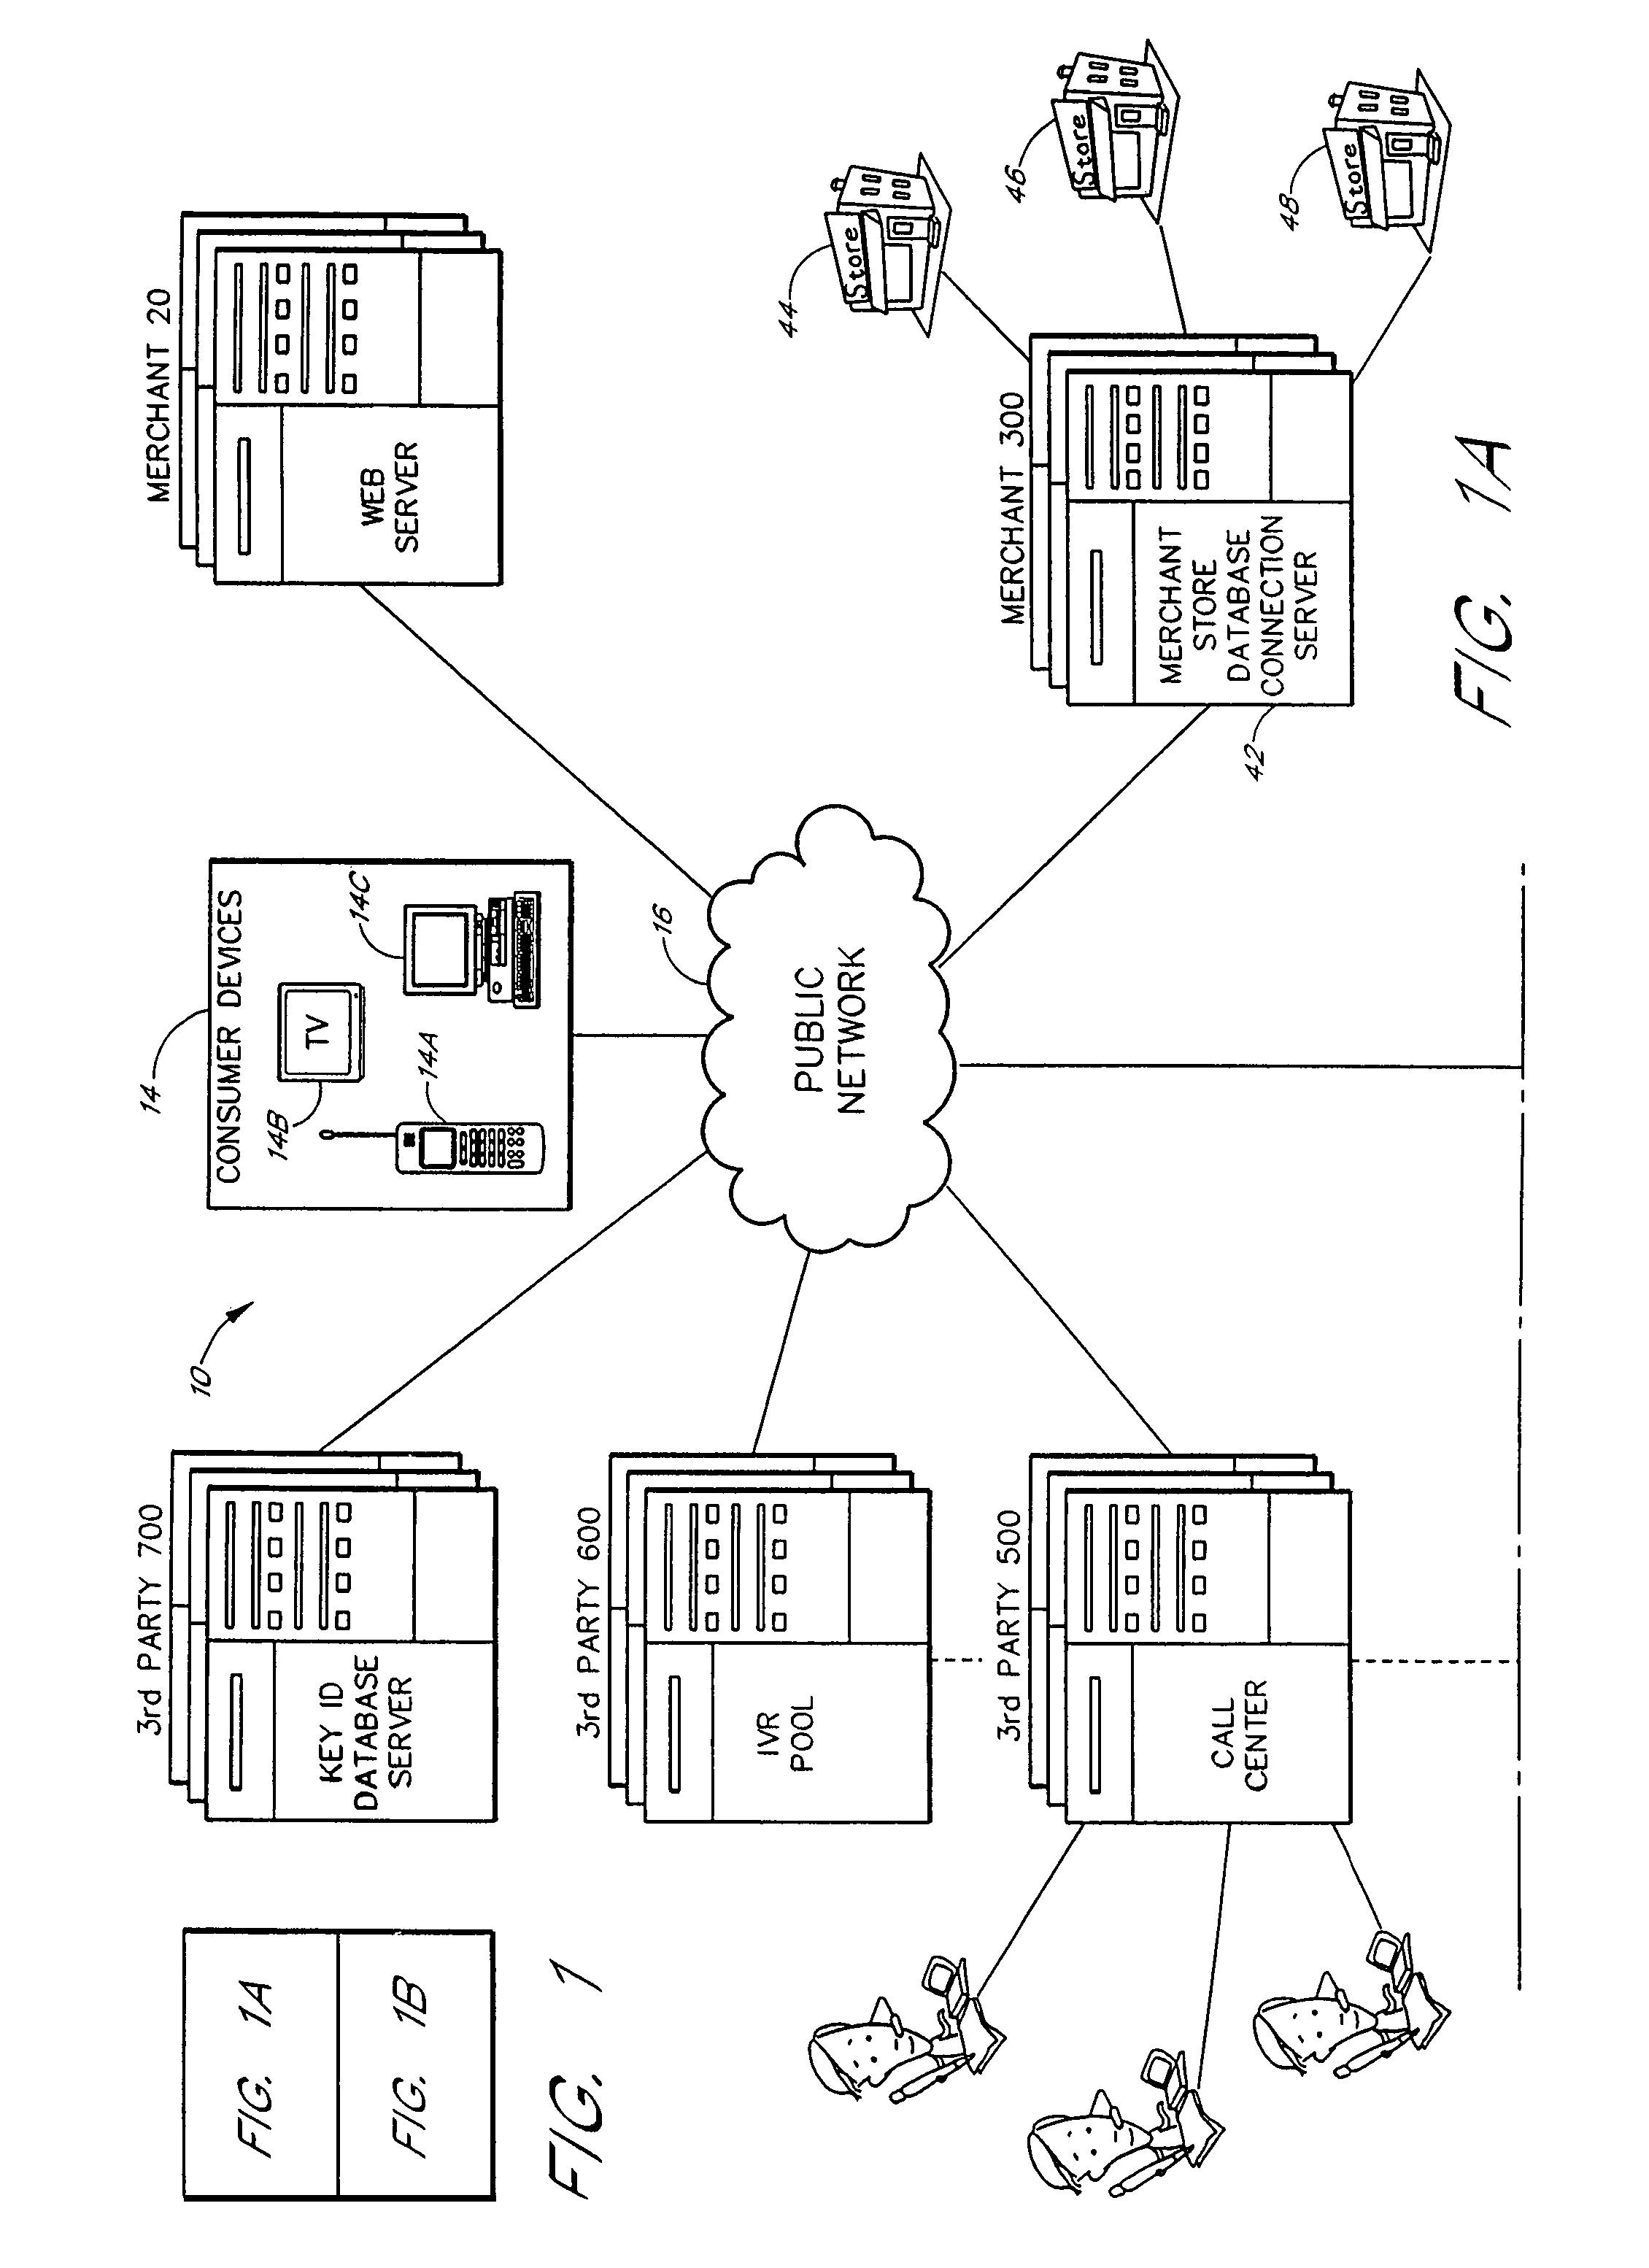 System for linking information in a global computer network